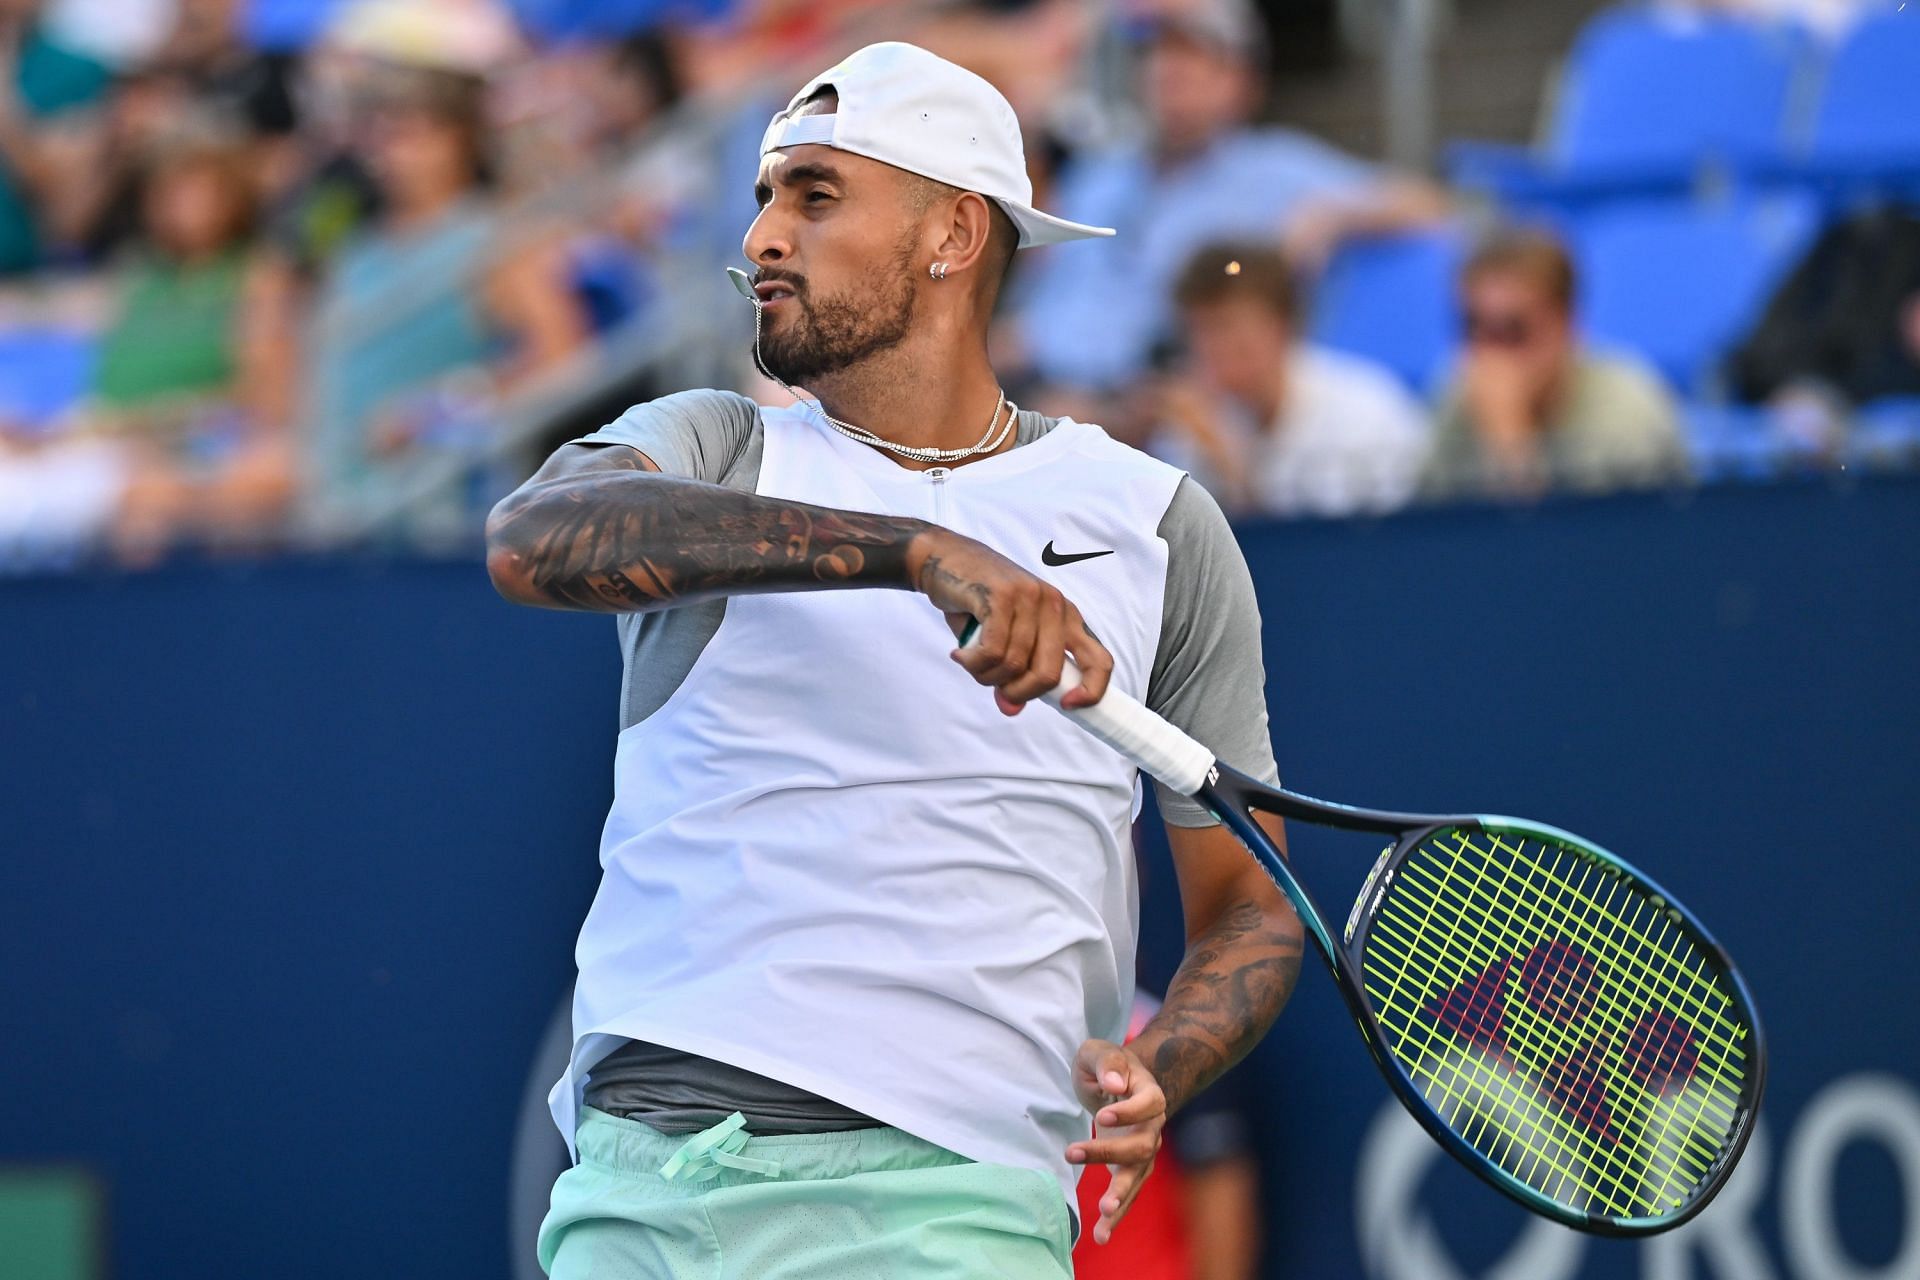 Canadian Open 2022 Nick Kyrgios vs Hubert Hurkacz preview, head to head, prediction, odds and pick